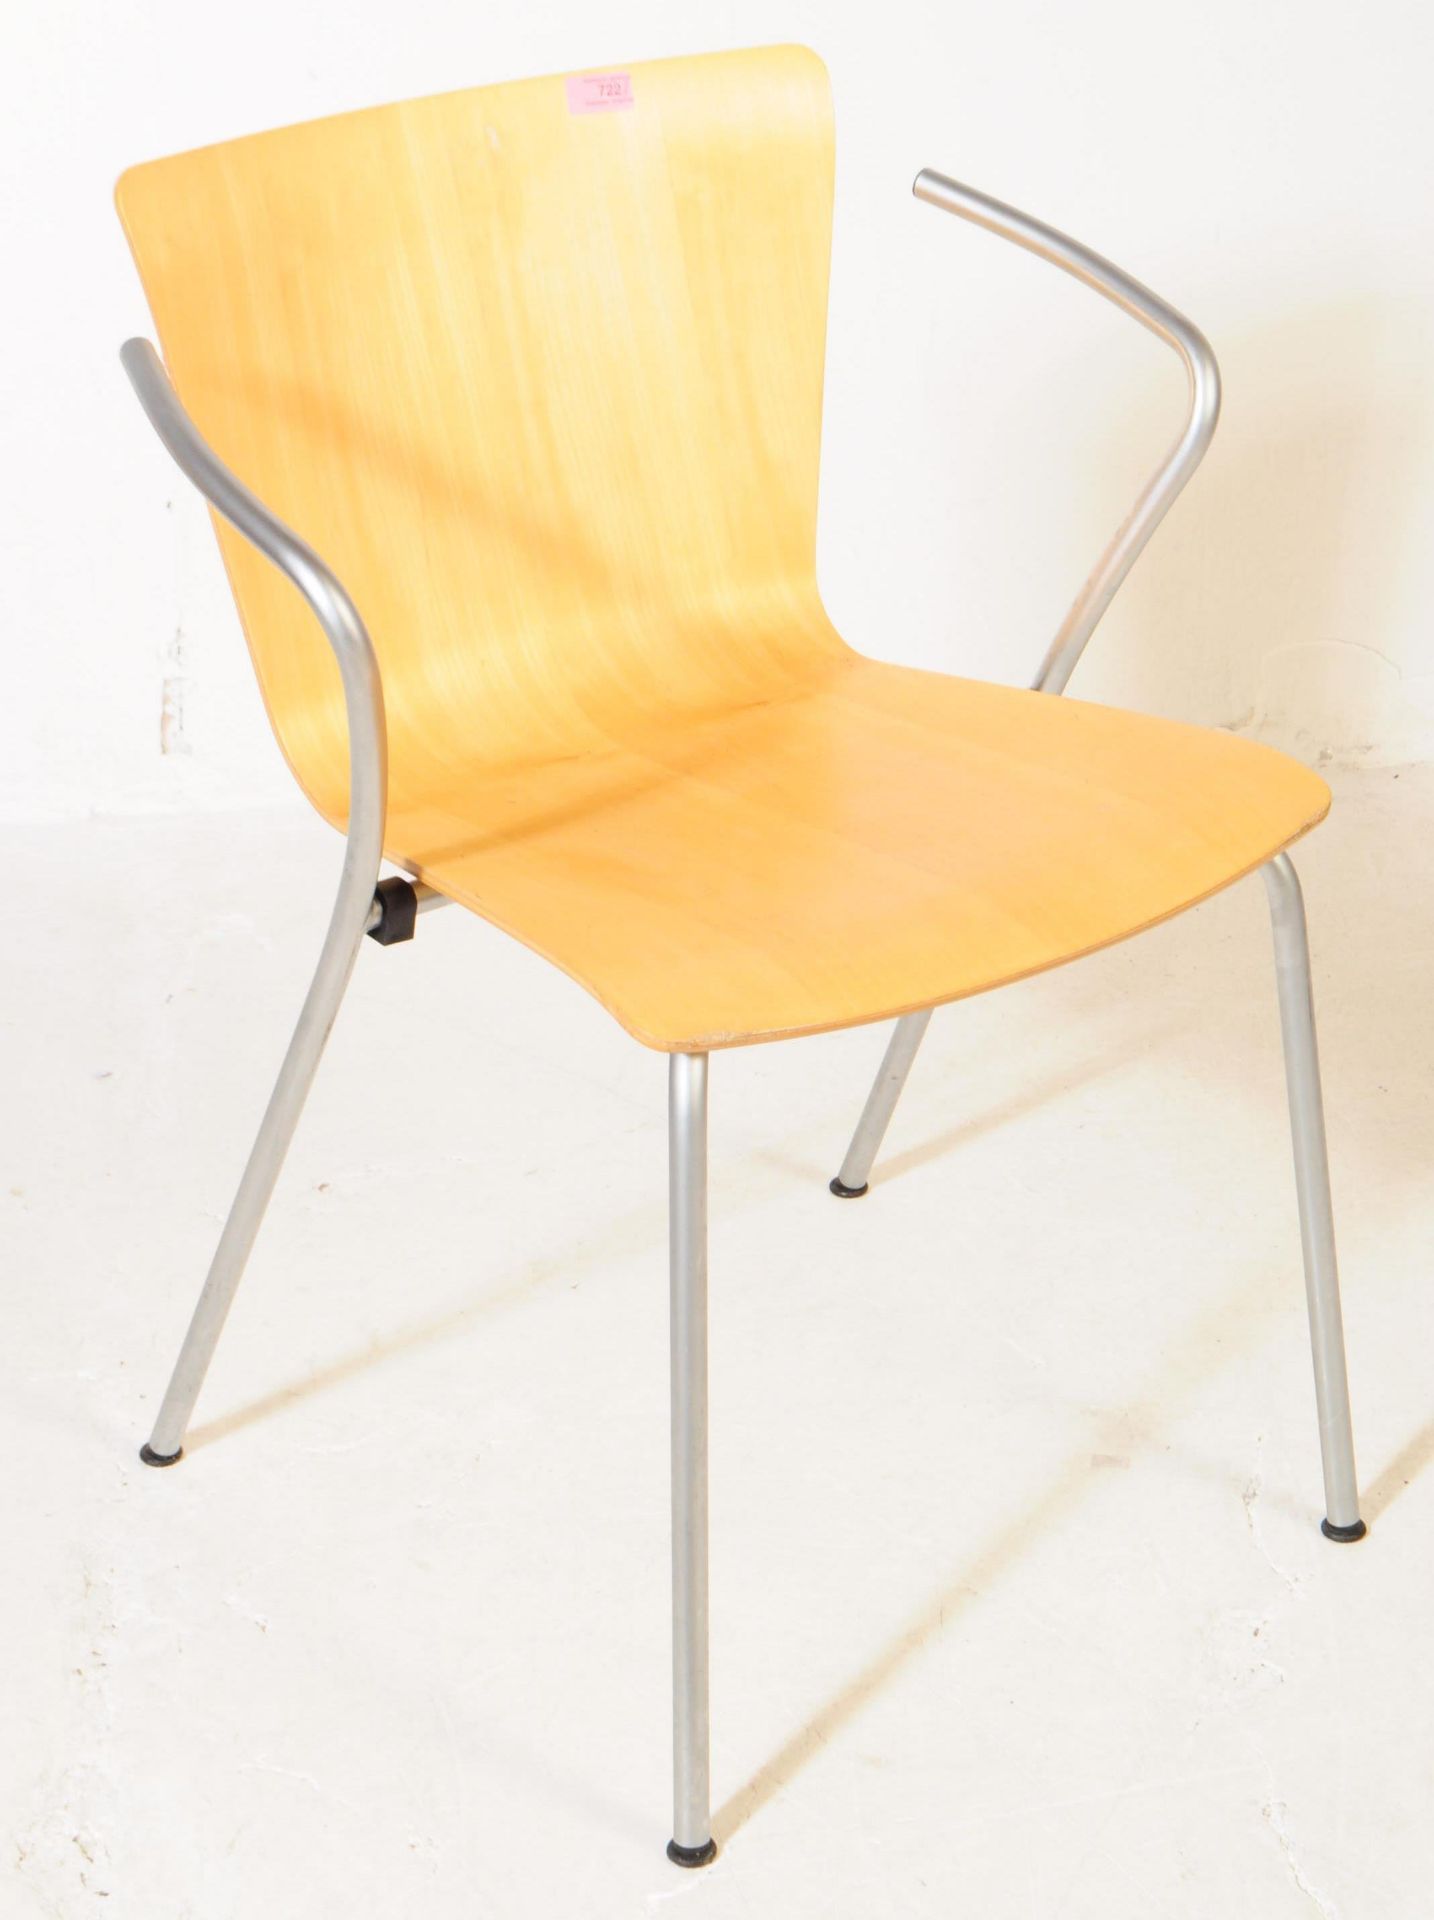 VICO MAGISTRETTI FOR FRITZ HANSEN - FOUR 20TH CENTURY DUO STACKING DINING CHAIRS - Bild 4 aus 4